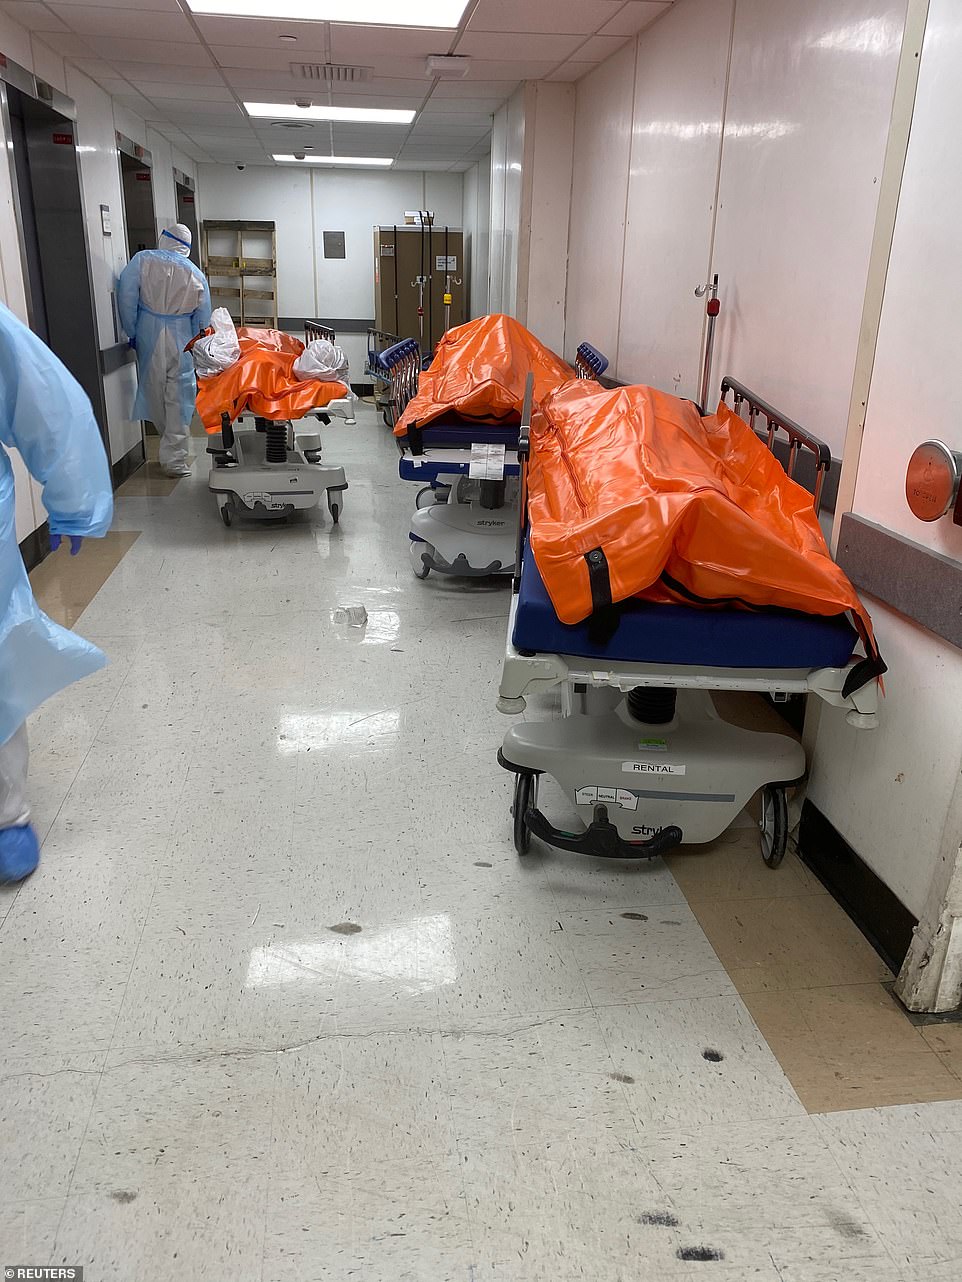 26822954-8188623-Bodies_are_seen_lying_in_corridors_inside_the_Wyckoff_Hospital_a-a-19_1586080459061.jpg